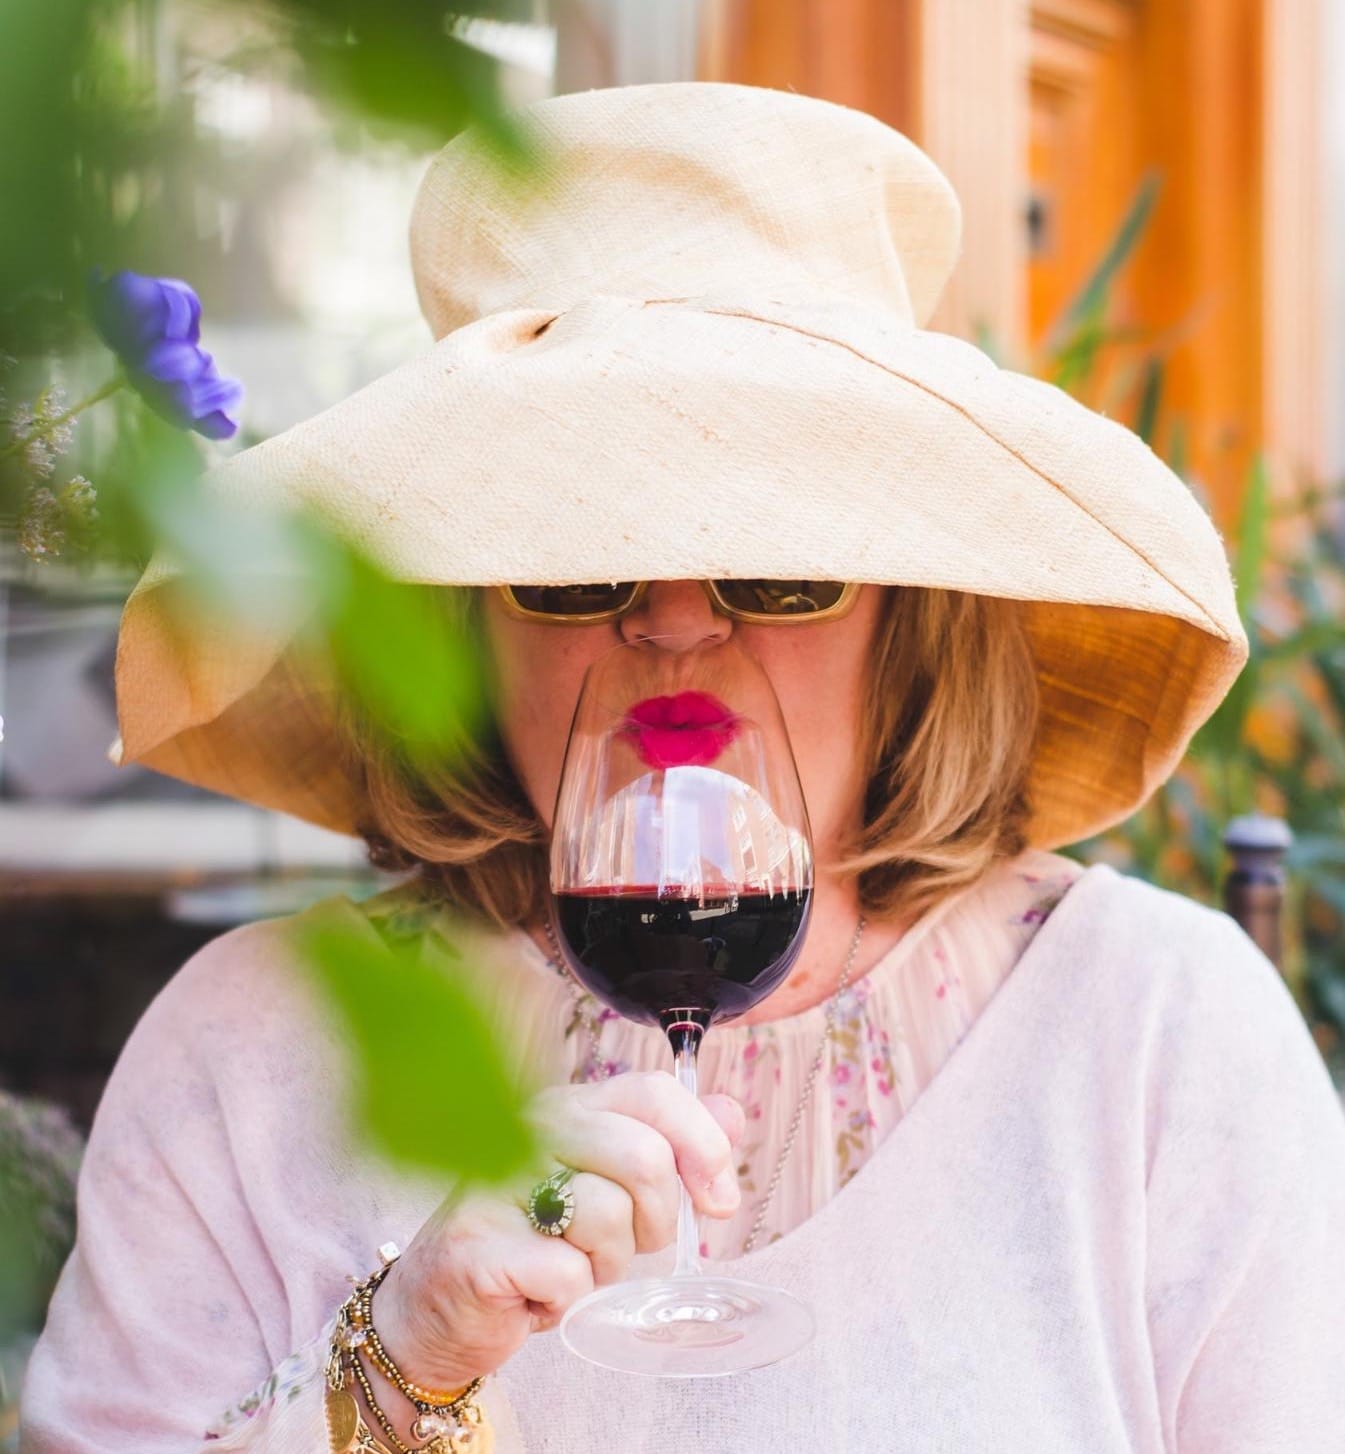 Lady in hat drinking red wine; WSET Level 3 exam